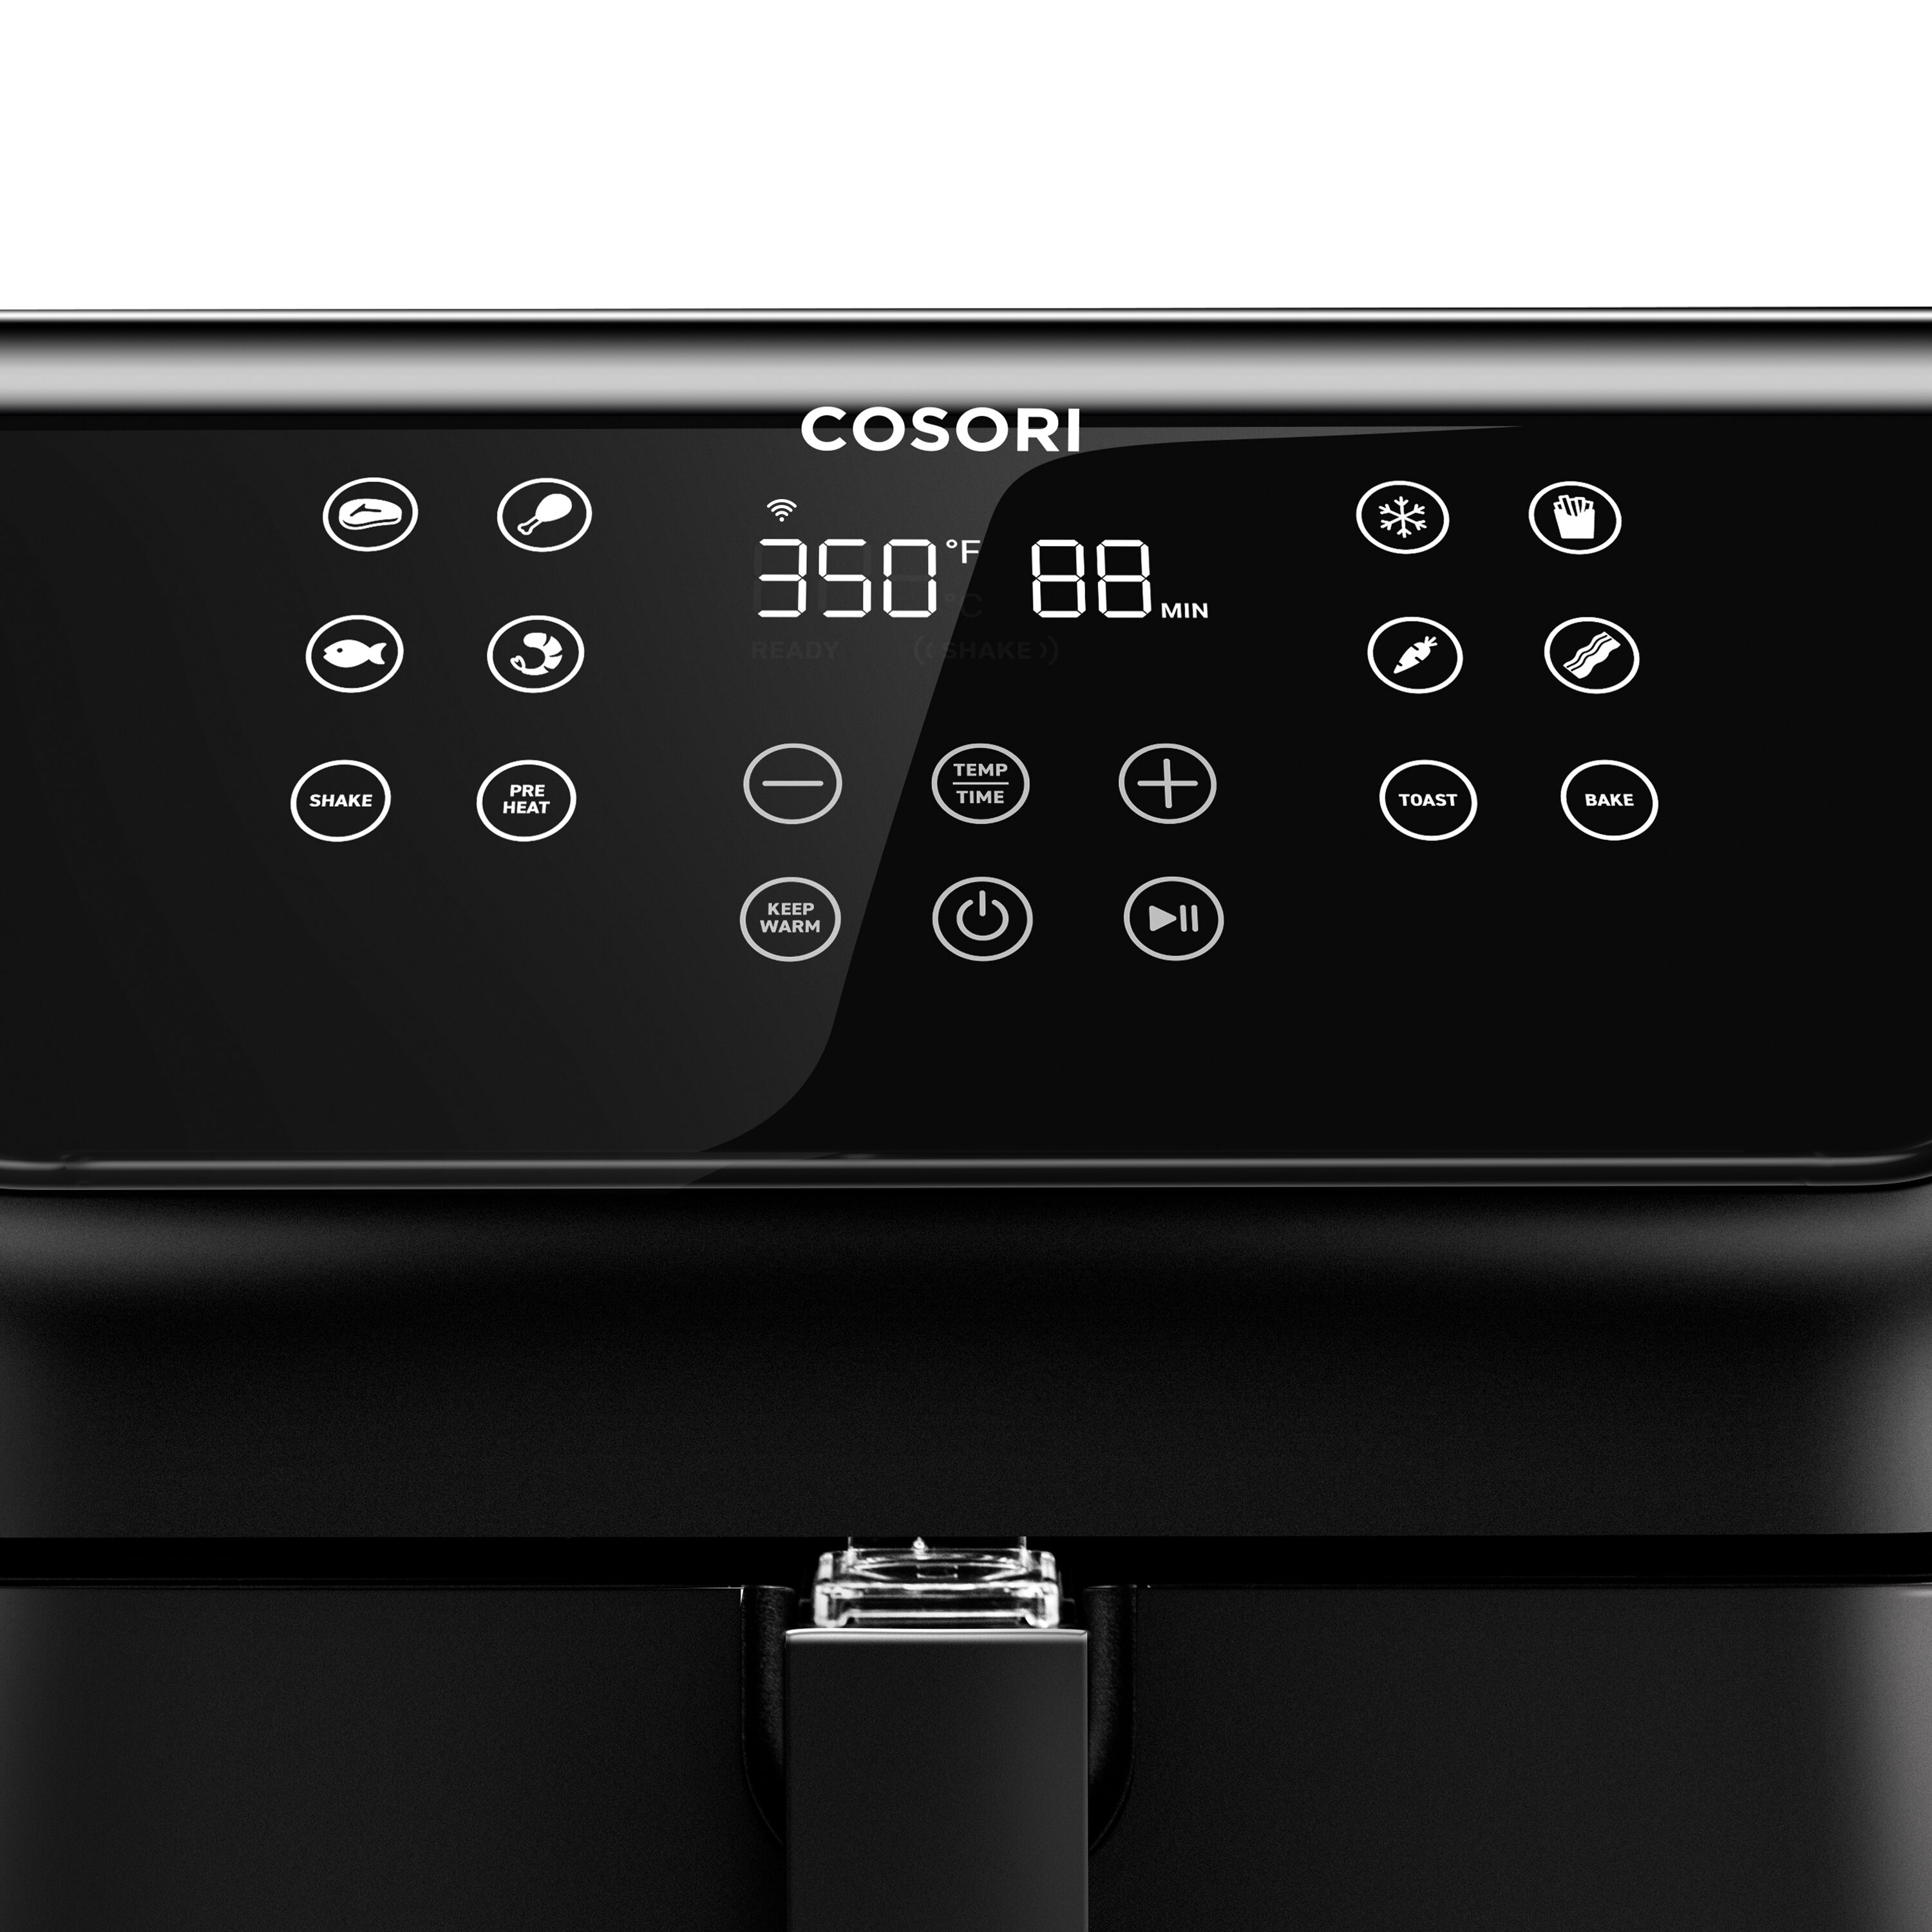 COSORI 5.8 QT Electric Hot Oven Oilless Cooker LED Touch Digital Screen